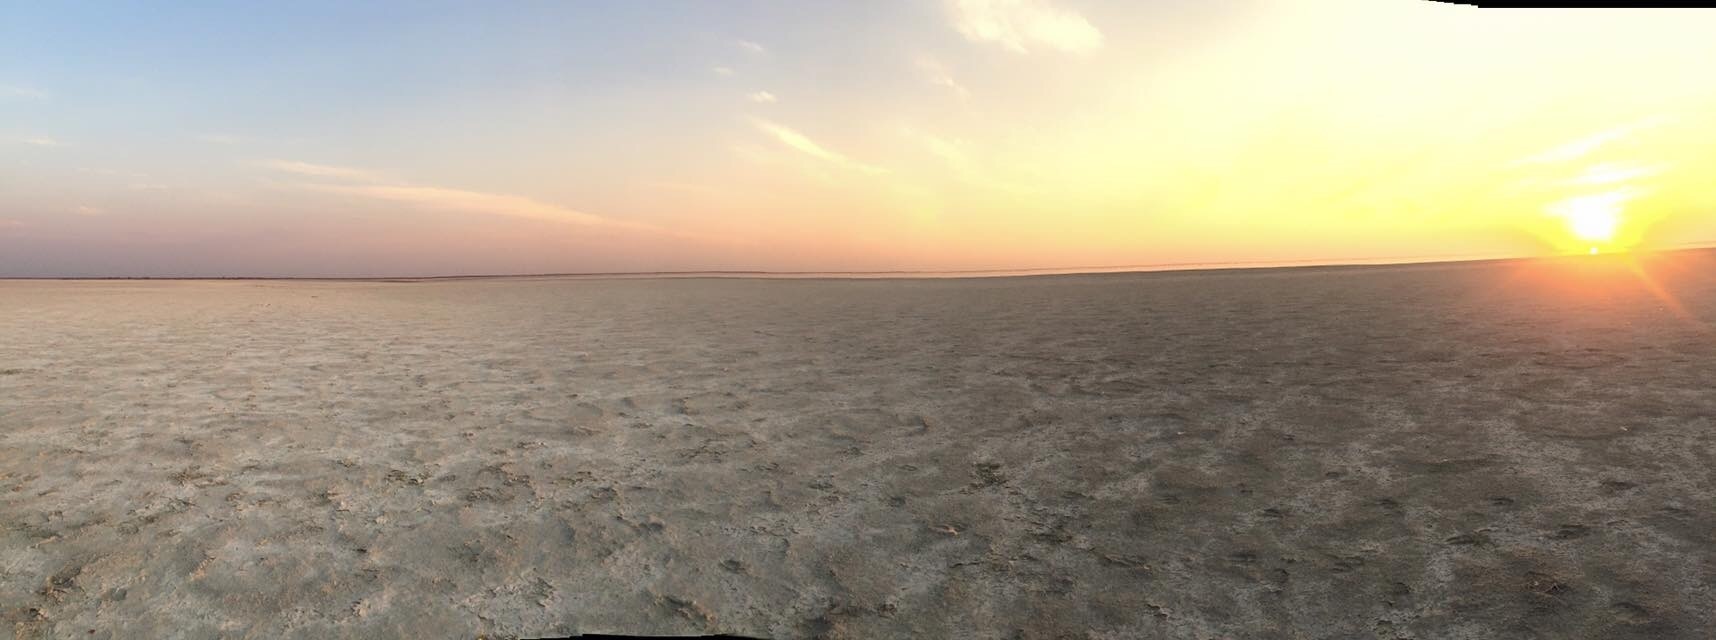 Sunset on the salt pans. Thousands of flamingoes on the horizon. Could mostly hear them rather than see them